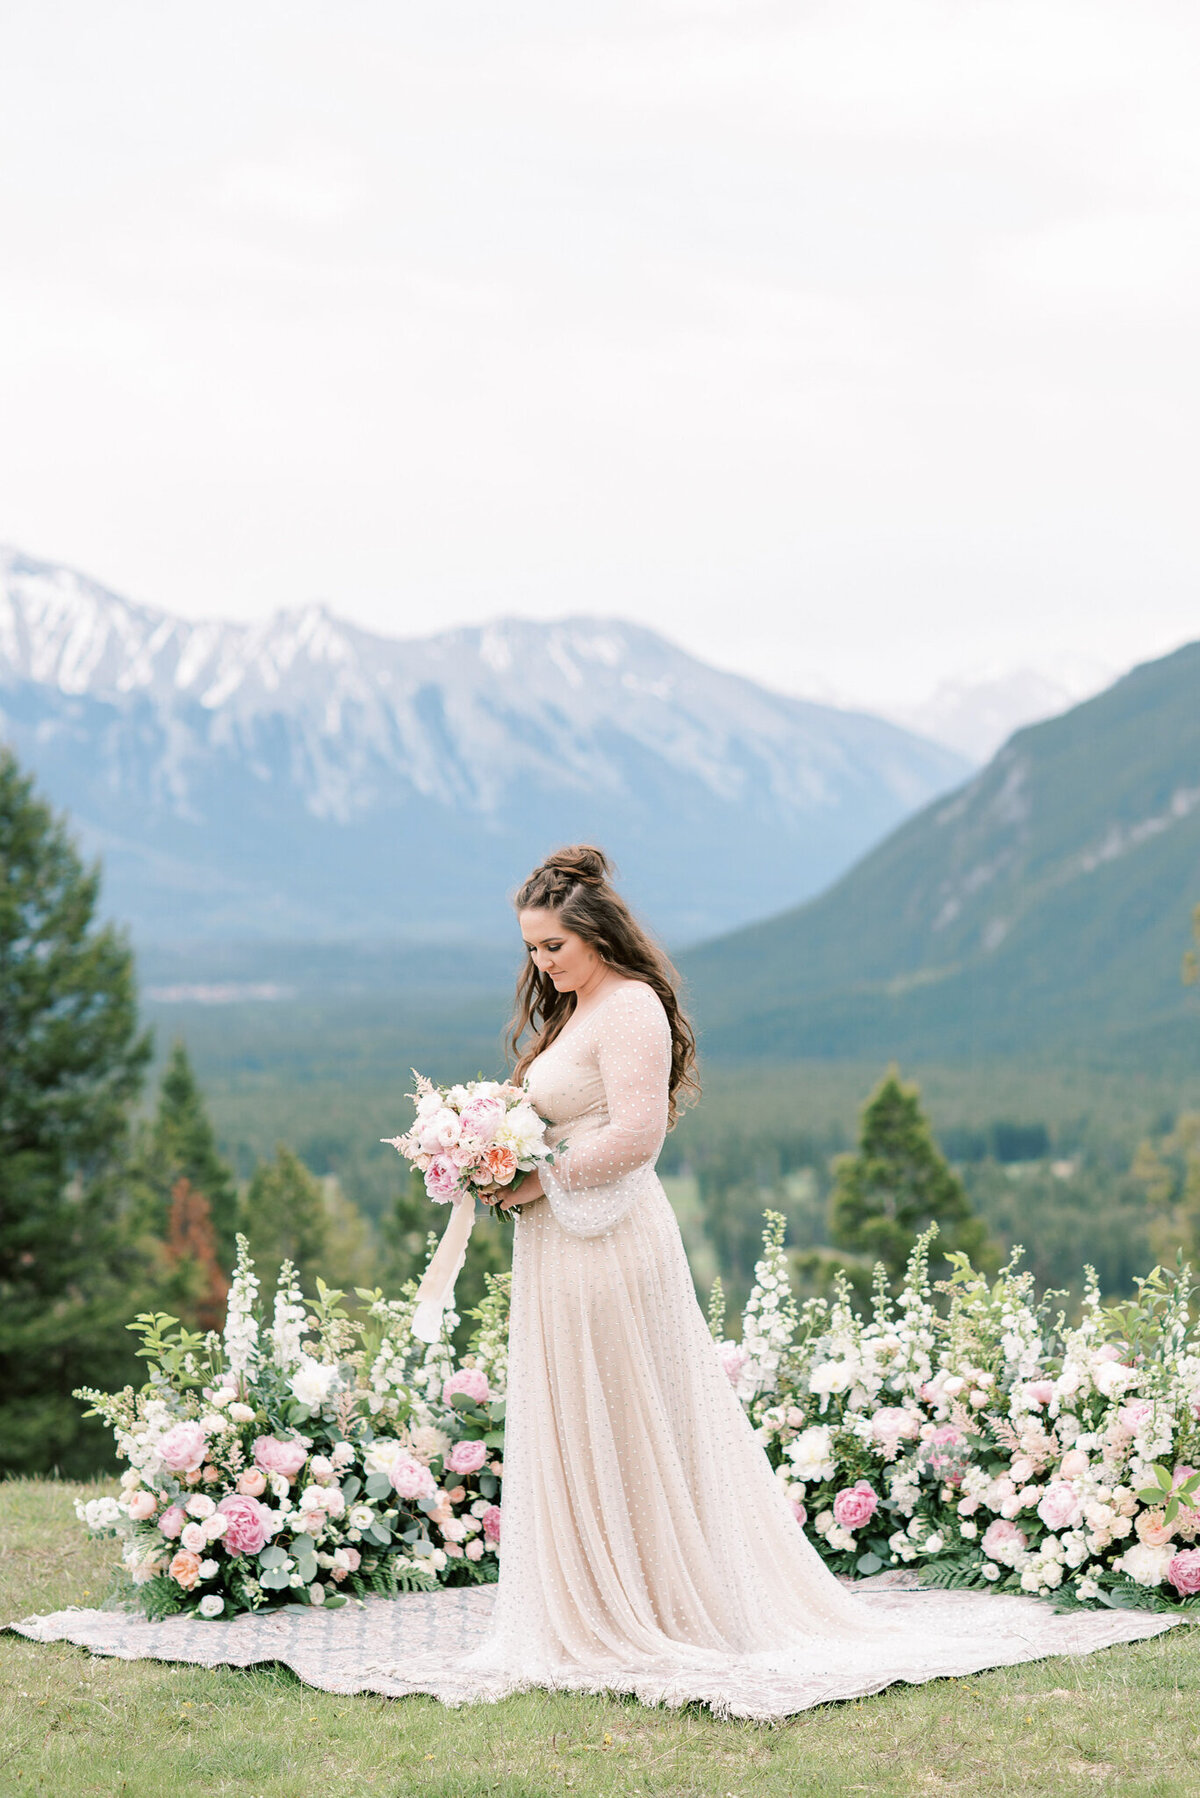 Bridal portrait inspiration with lush pink and white florals by Flowers By Janie, artful Calgary, Alberta wedding florist, featured on the Brontë Bride Vendor Guide.